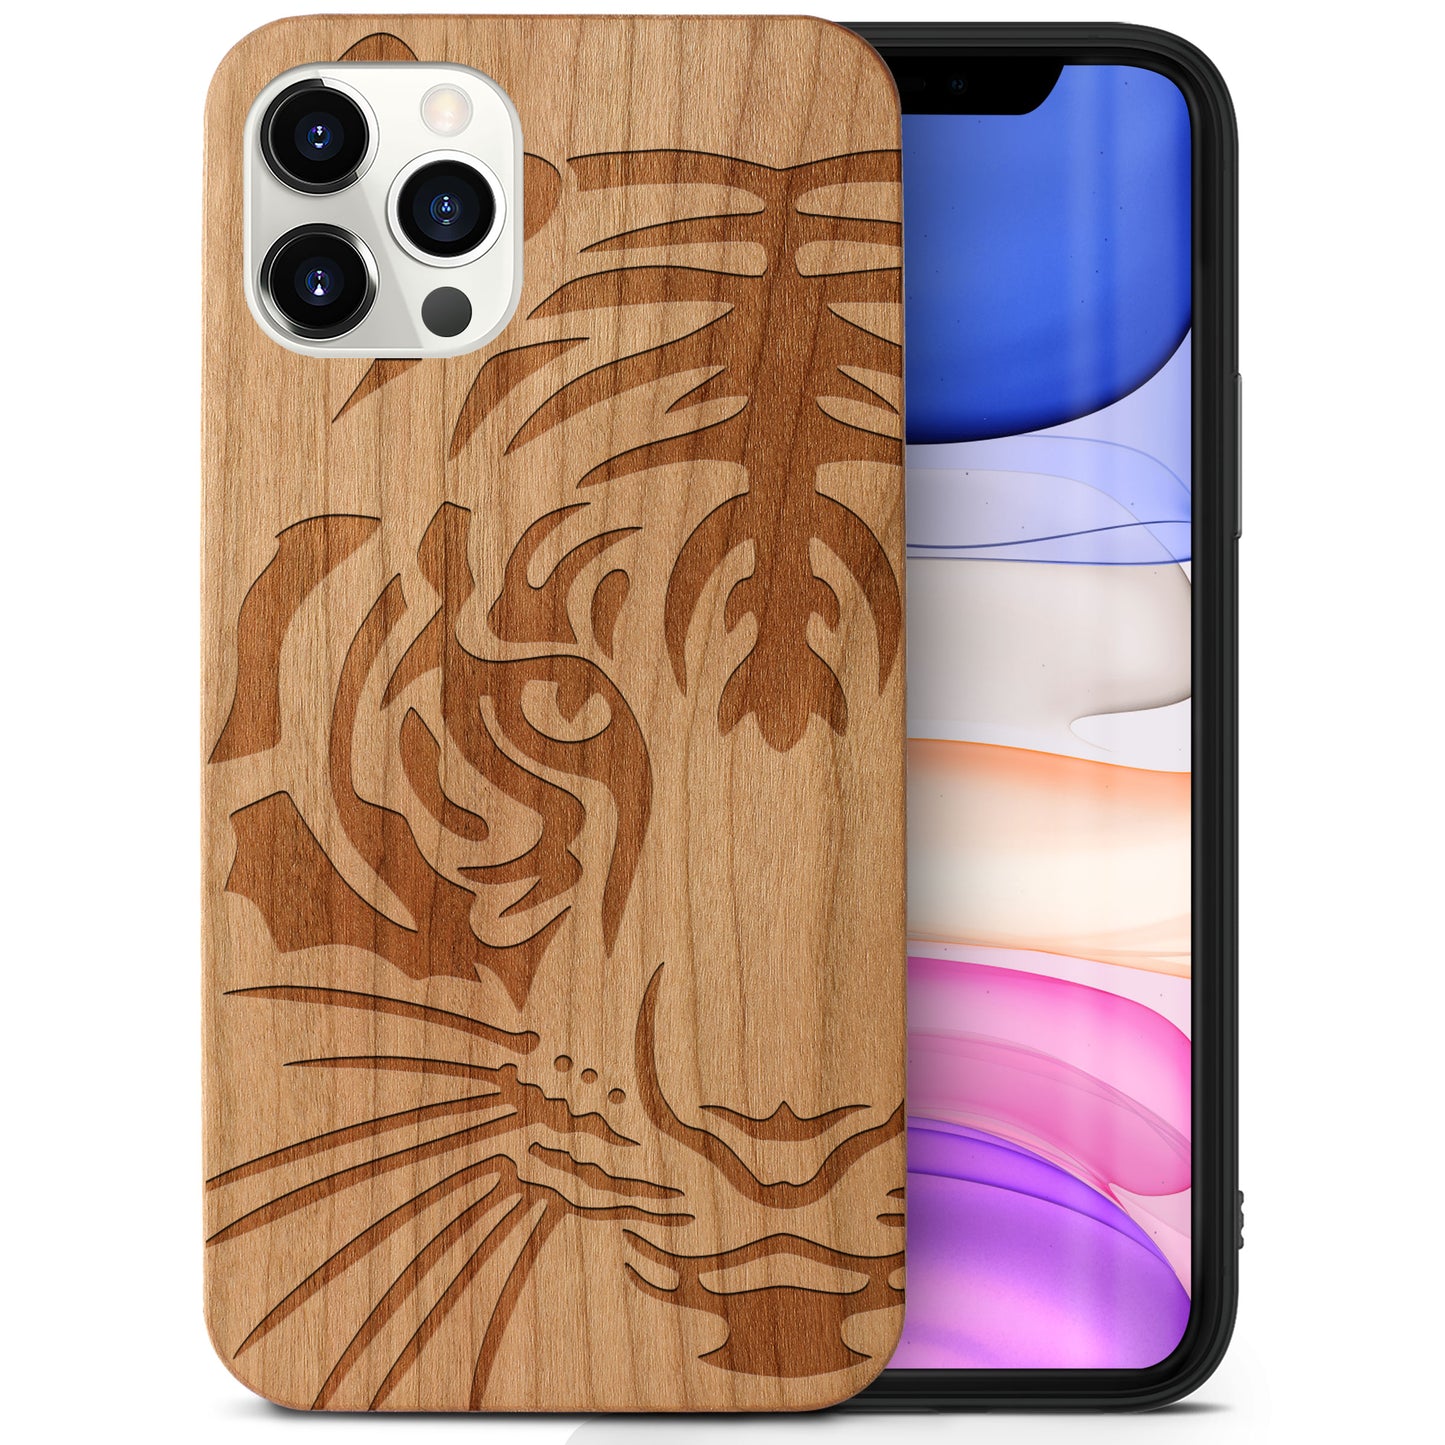 Wooden Cell Phone Case Cover, Laser Engraved case for iPhone & Samsung phone Half TigerFace Design